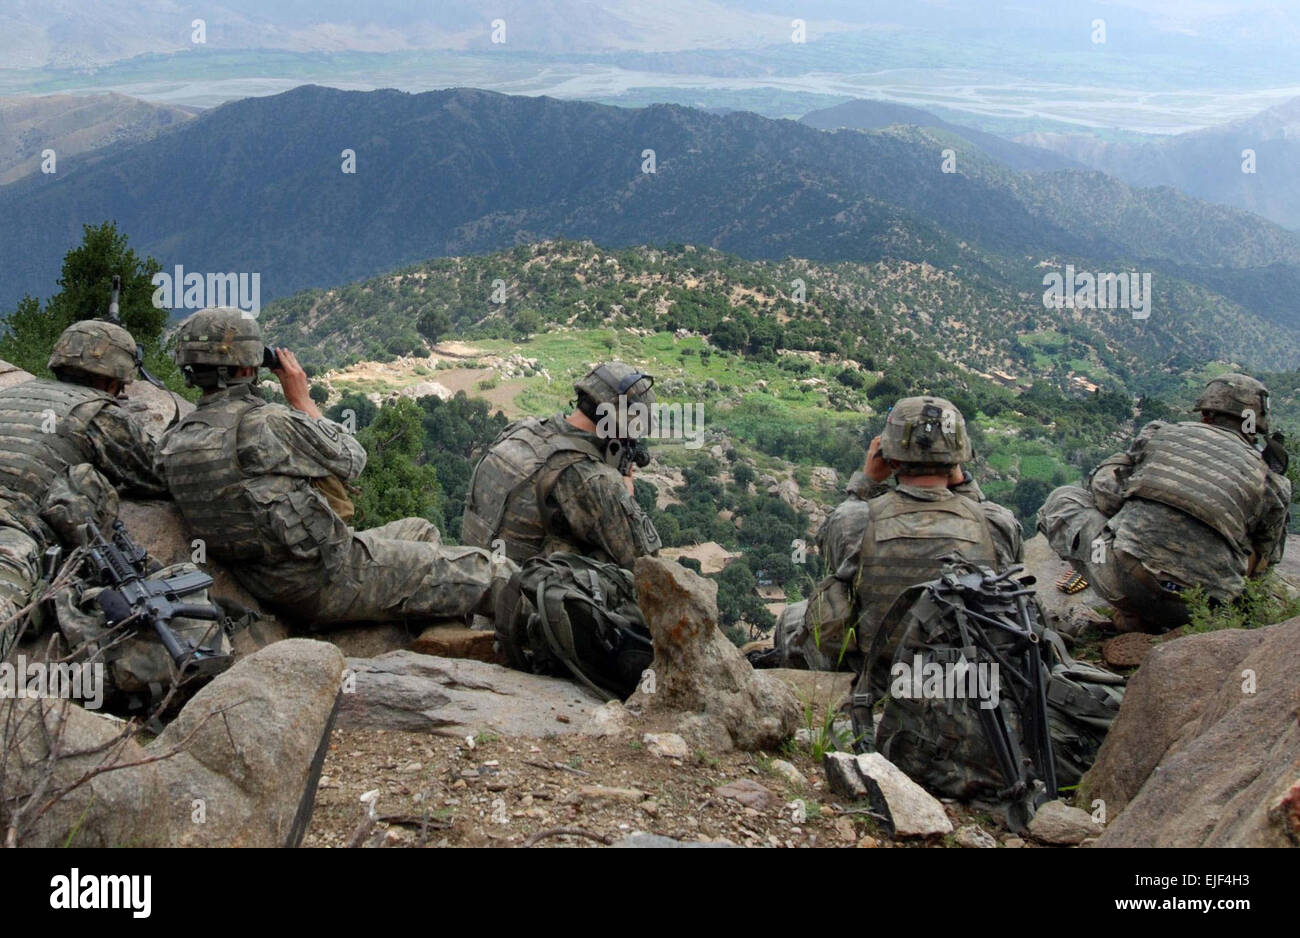 070822-A-6849A-667 -- Scouts from 2nd Battalion, 503rd Infantry Regiment Airborne, pull overwatch during Operation Destined Strike while 2nd Platoon, Able Company searches a village below the Chowkay Valley in Kunar Province, Afghanistan Aug. 22. Stock Photo